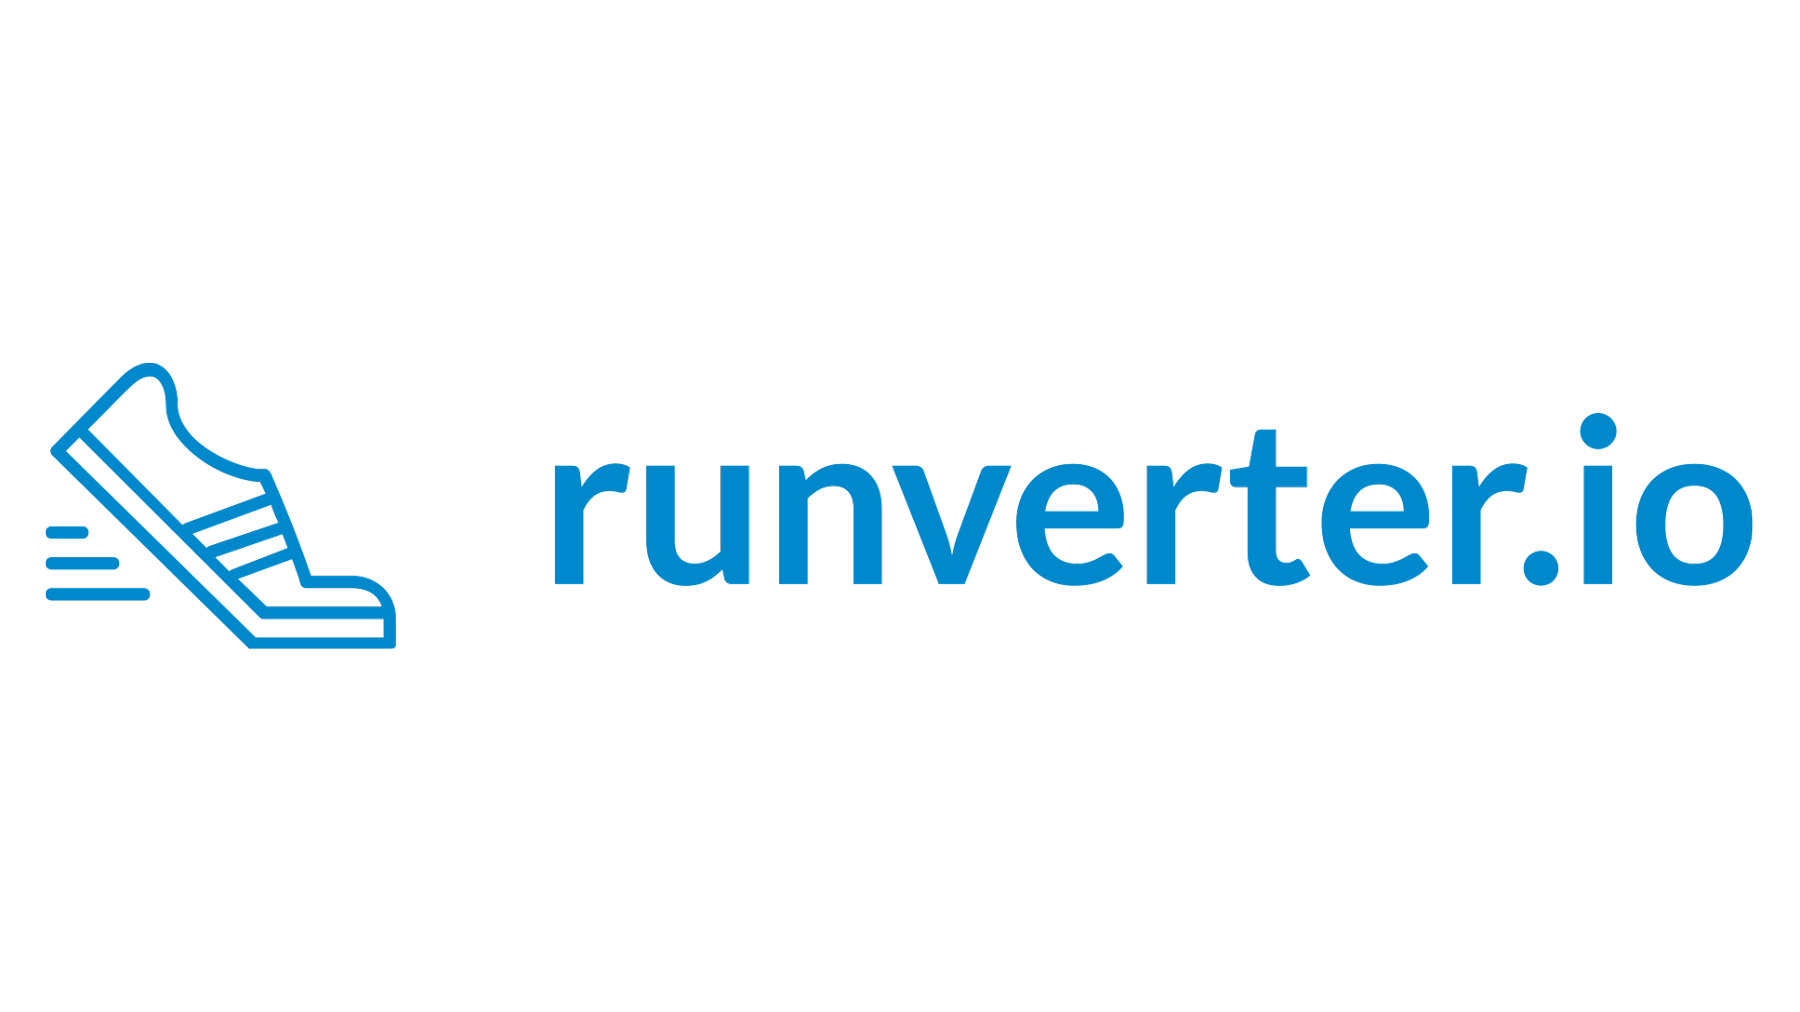 The Runverter logo. It shows a little running shoe icon followed by the text runverter.io